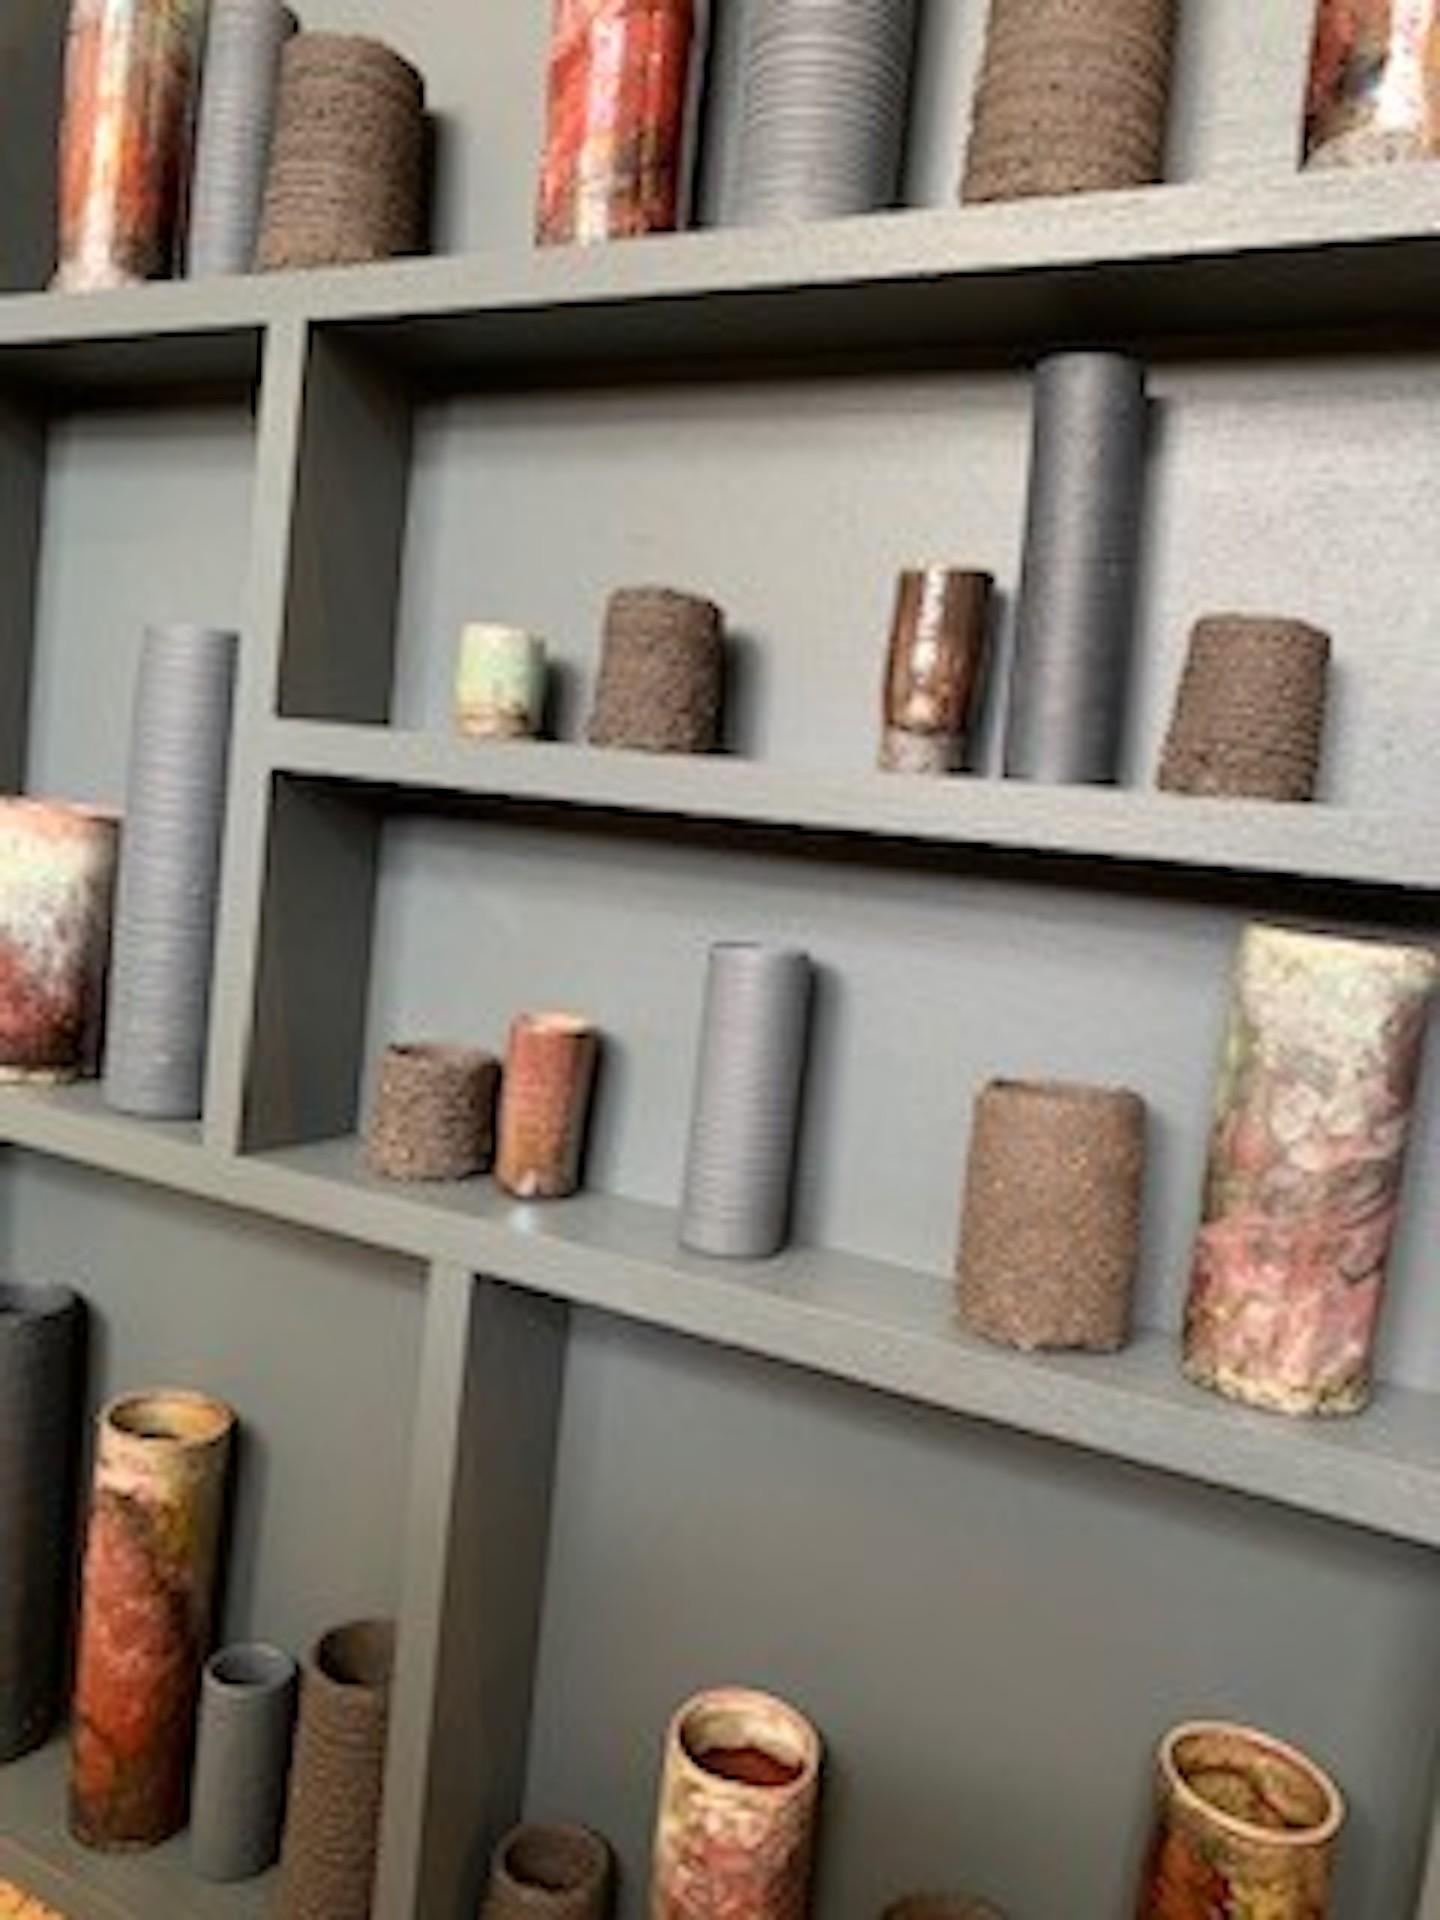 Emma Bell
Dark clays I
H70cm x w49cm x 7cm
Emma Bell’s ceramic and porcelain Pot Frame – Installation Piece.
Emma Bell says: “This piece is inspired by my glaze test vessels. As a potter, I am always staggered by how different the same/similar glaze